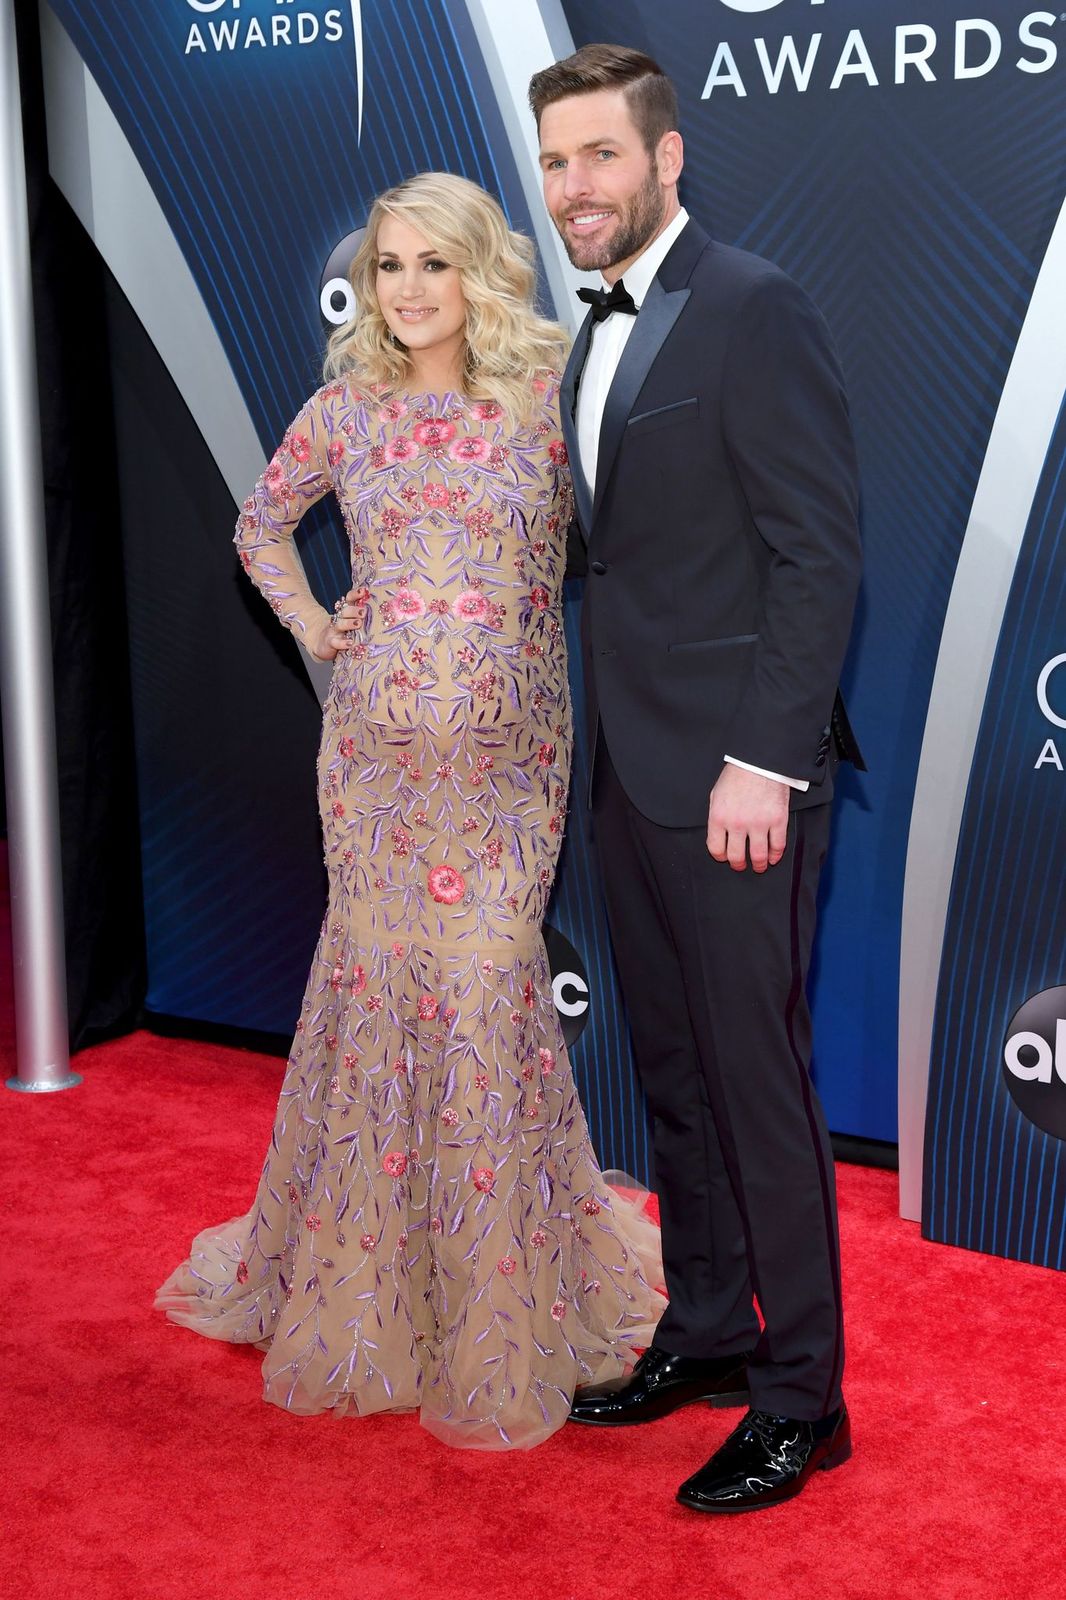 Carrie Underwood and Mike Fisher at the 52nd annual CMA Awards on November 14, 2018, in Nashville, Tennessee | Photo: Jason Kempin/Getty Images